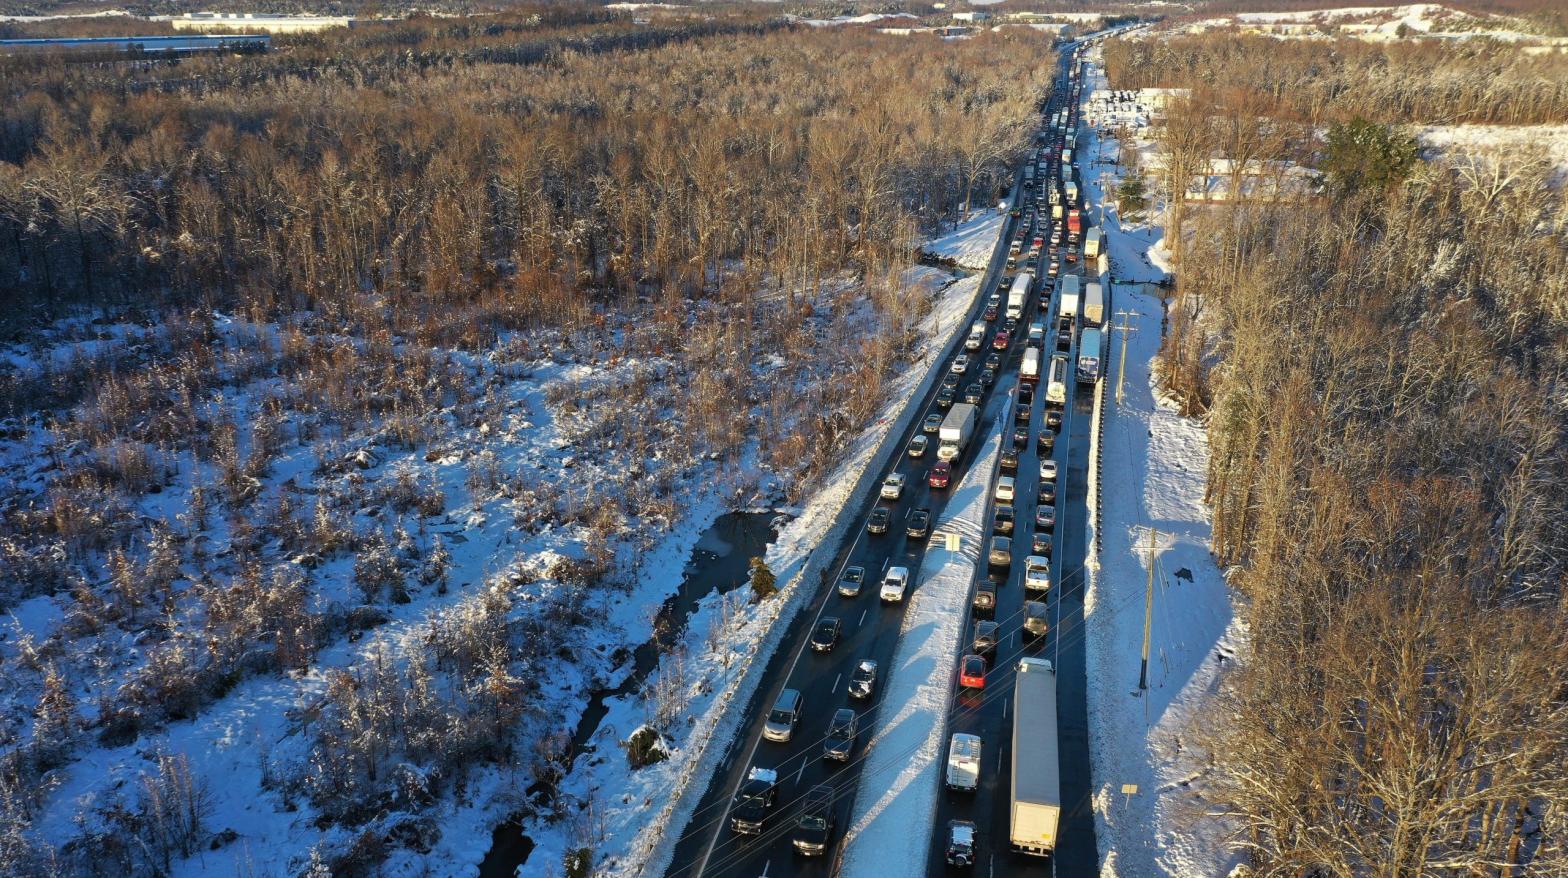 Traffic backed up on Virginia Highway 1 after being diverted from I-95 near Fredericksburg, Virginia on Jan. 4, 2022. (Photo: Chip Somodevilla, Getty Images)